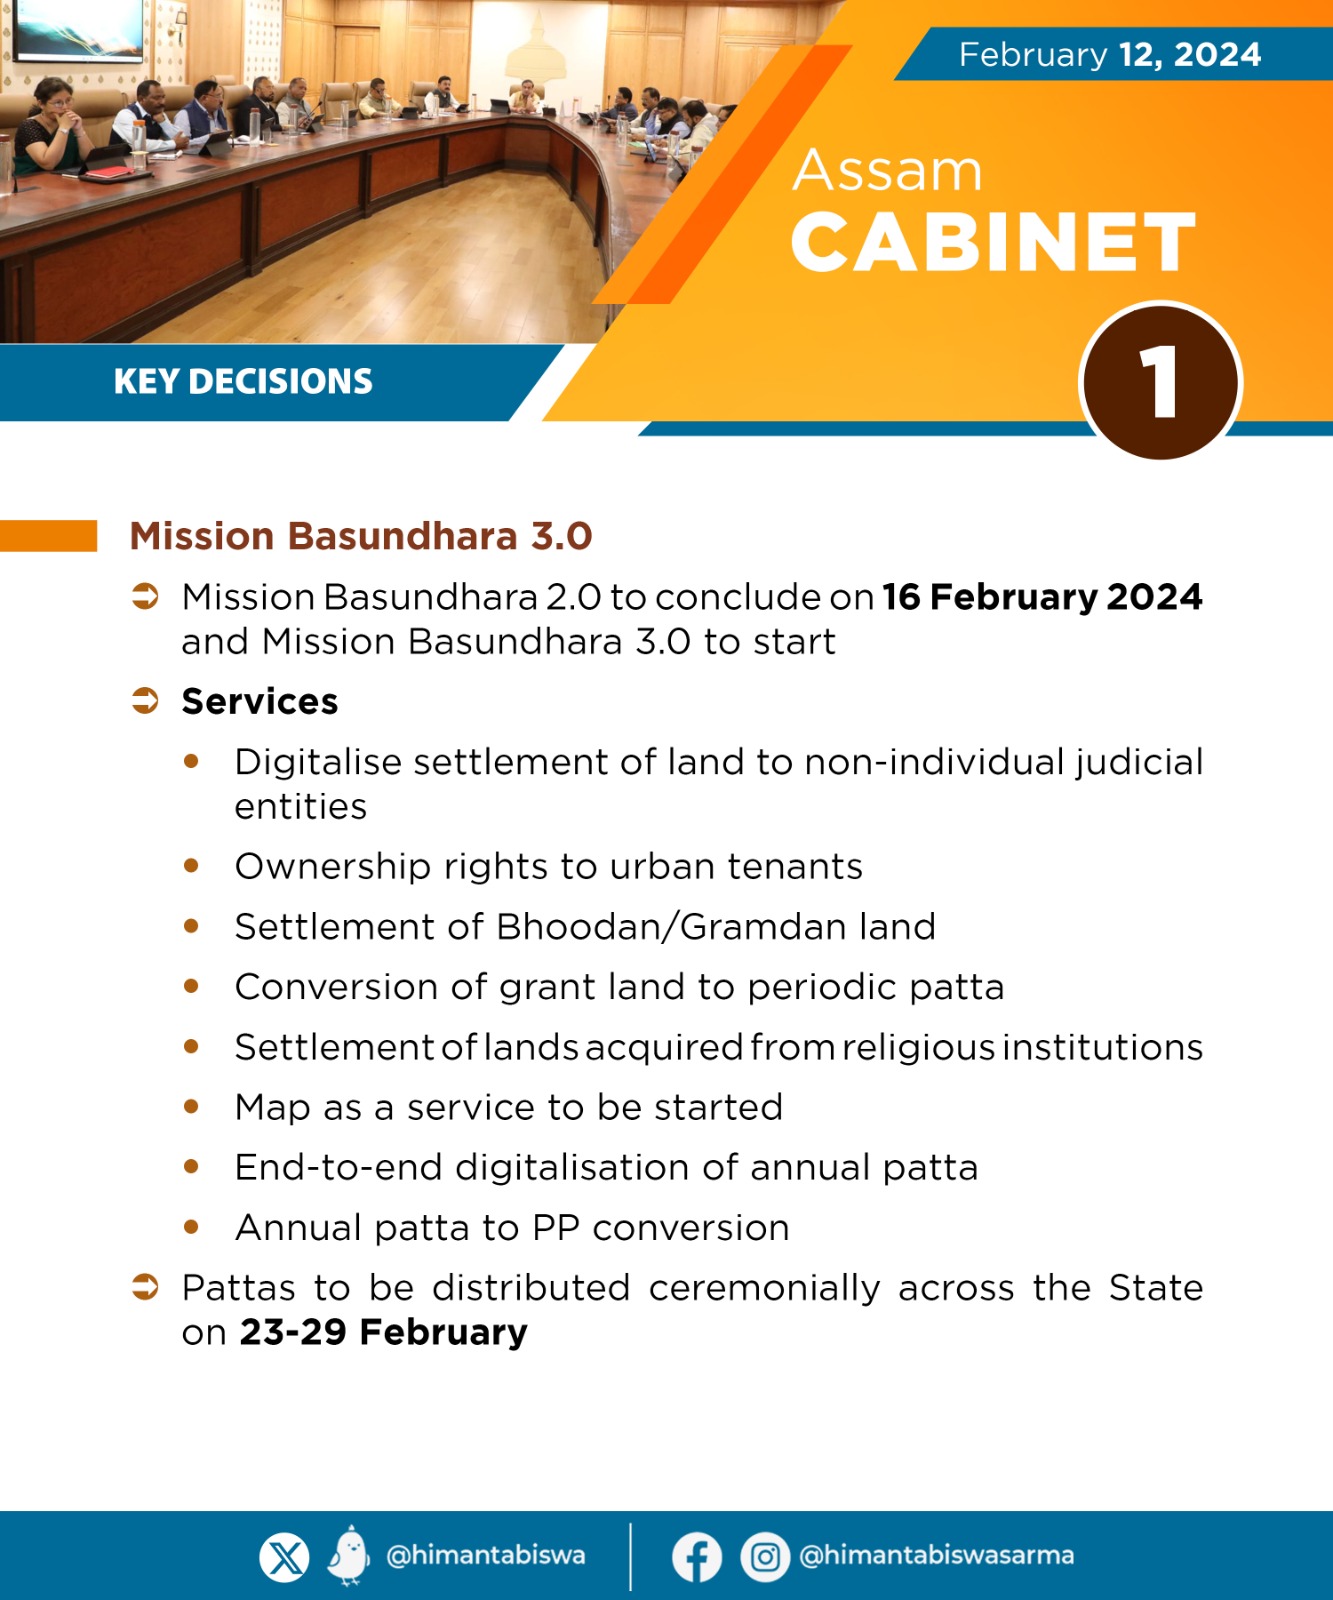 Cabinet decision on 12 February, 2024 